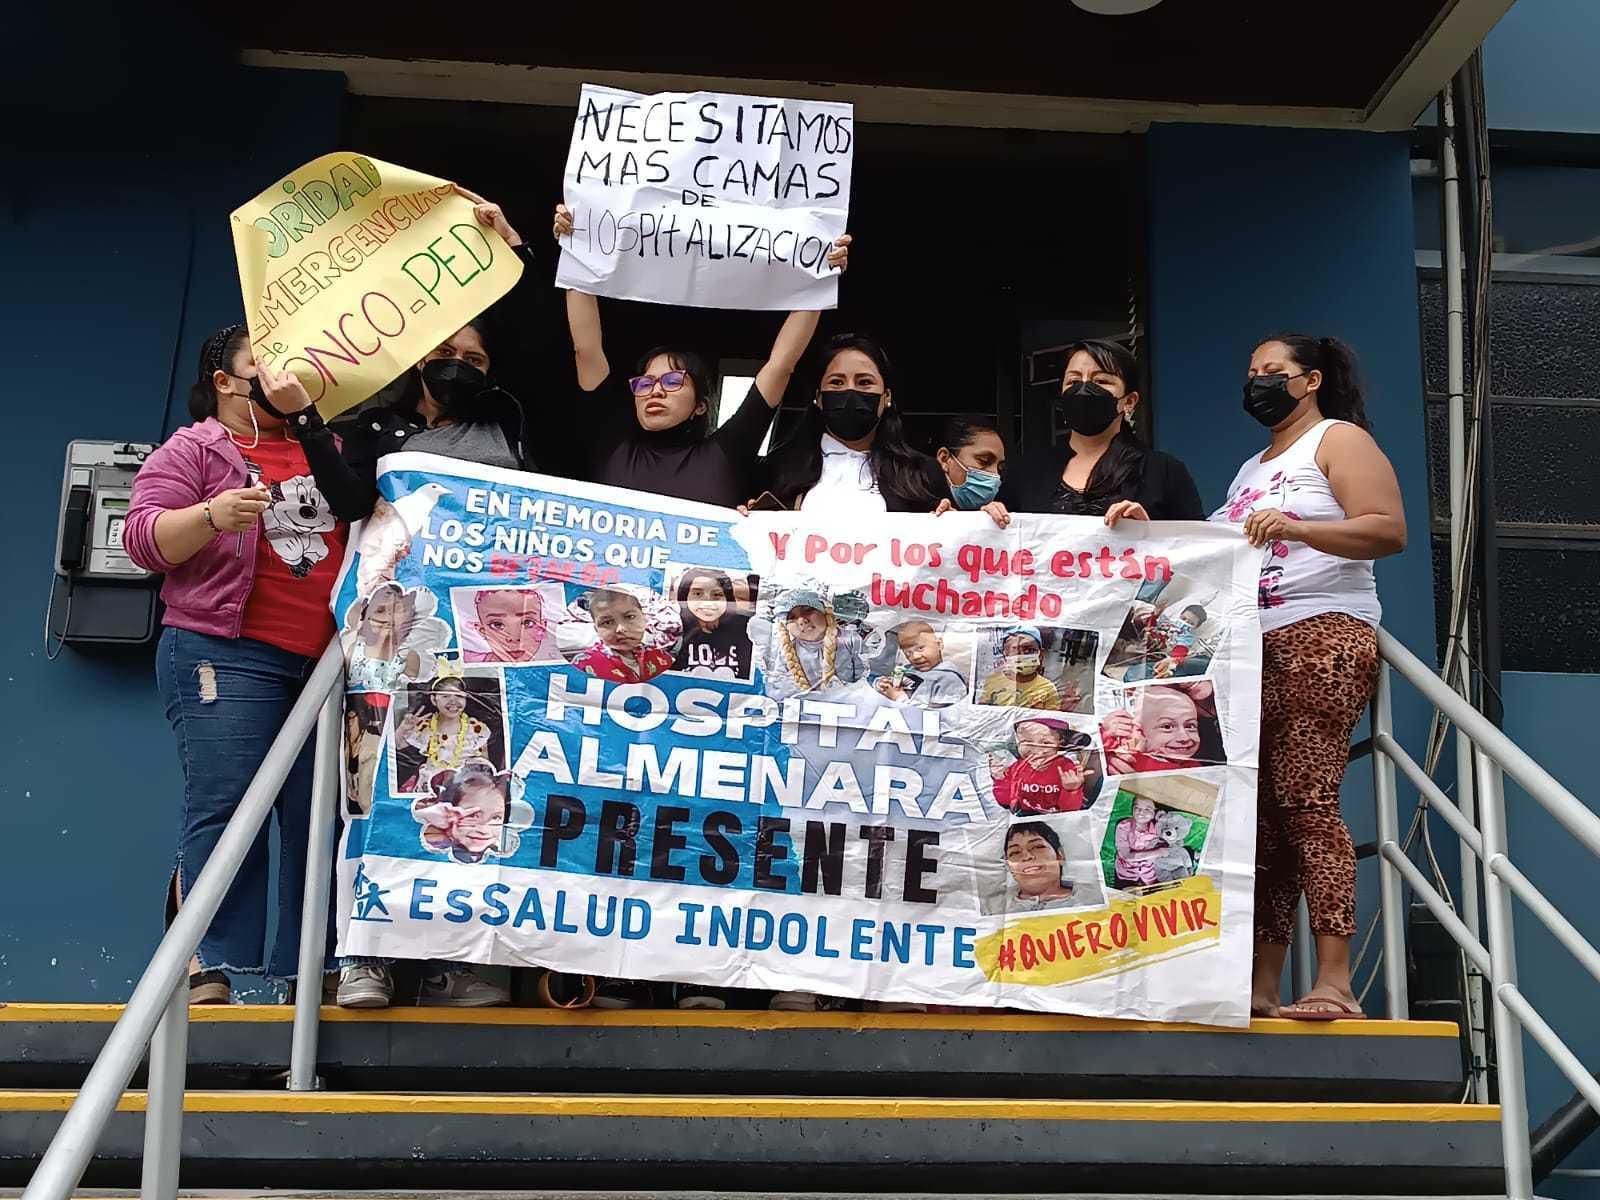 Parents of sick children demand accountability for cancer patients in Peru.